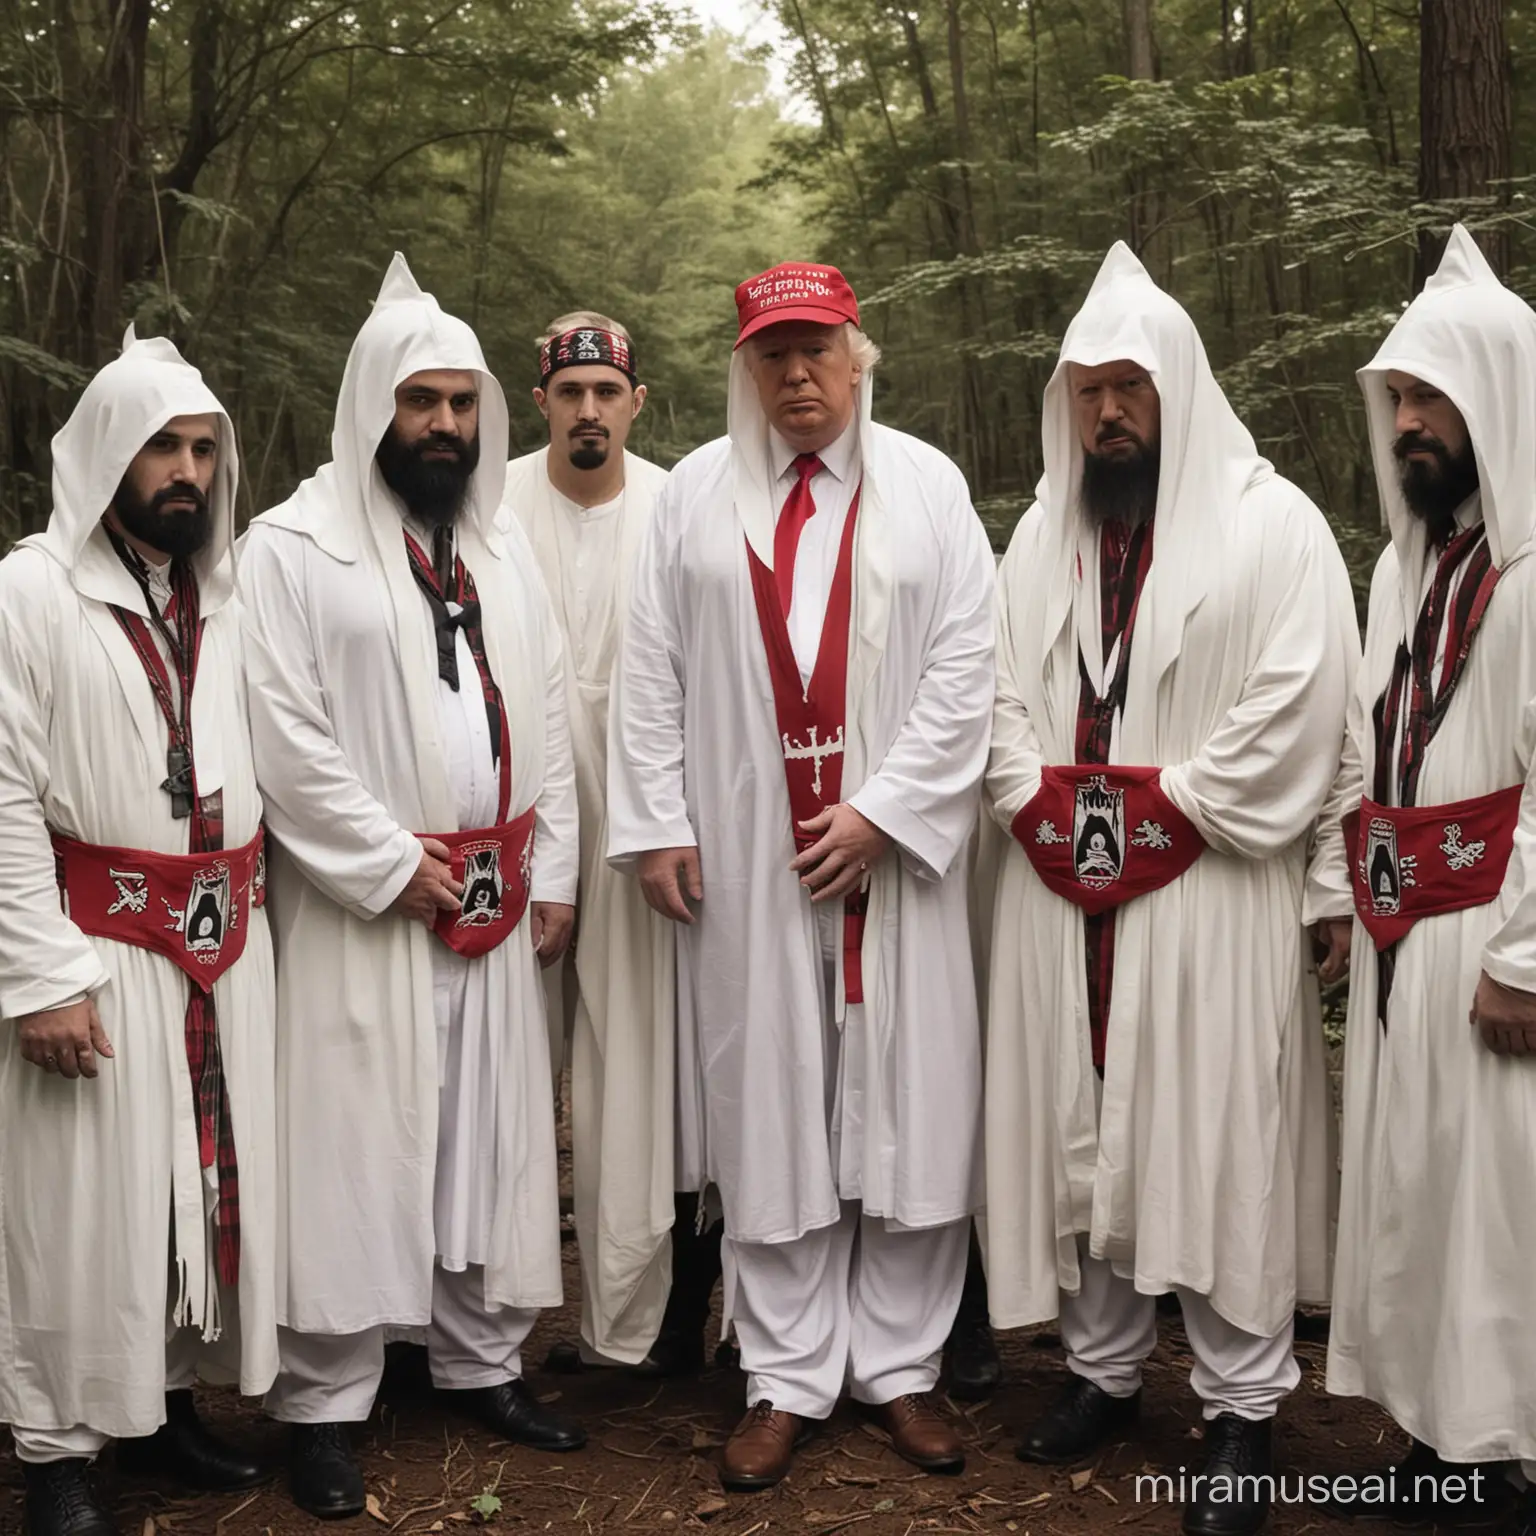 Donald Trump Standing with Klansmen at a Rally